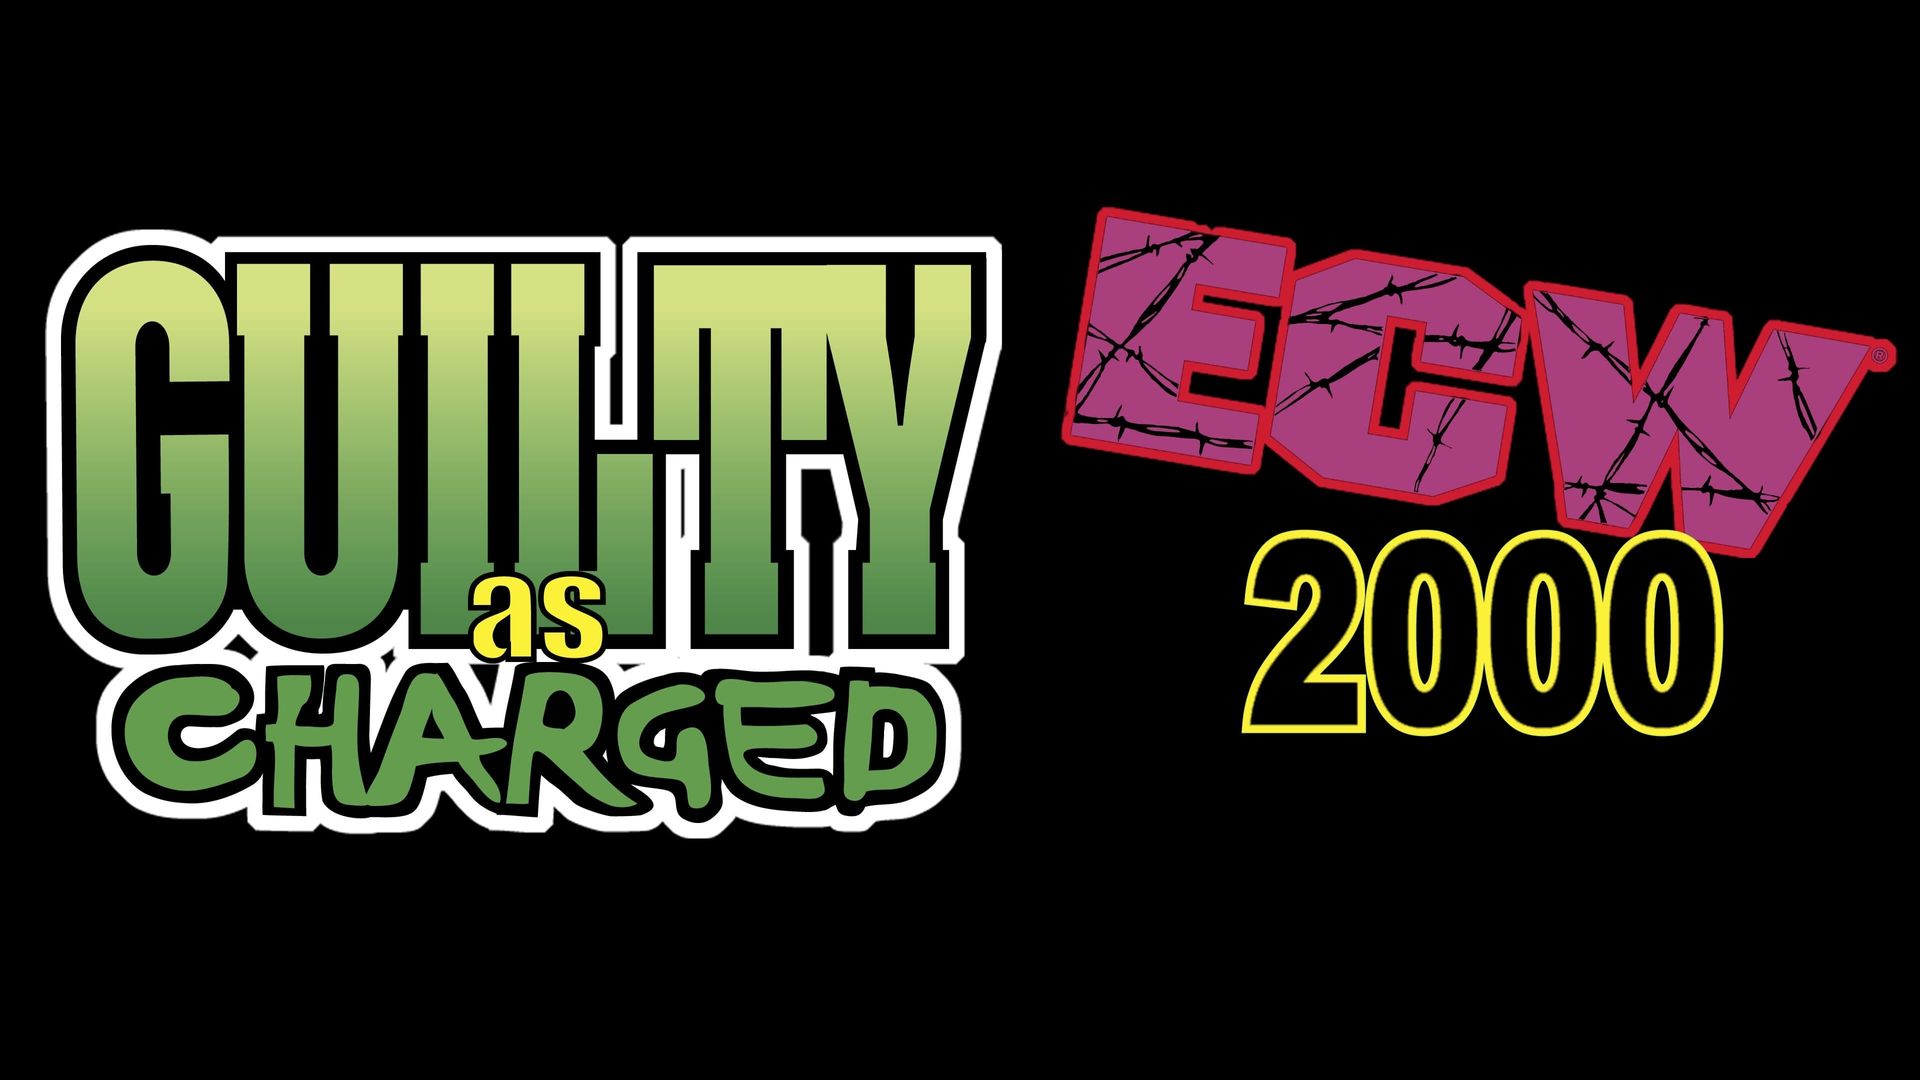 ECW Guilty as Charged 2000 background